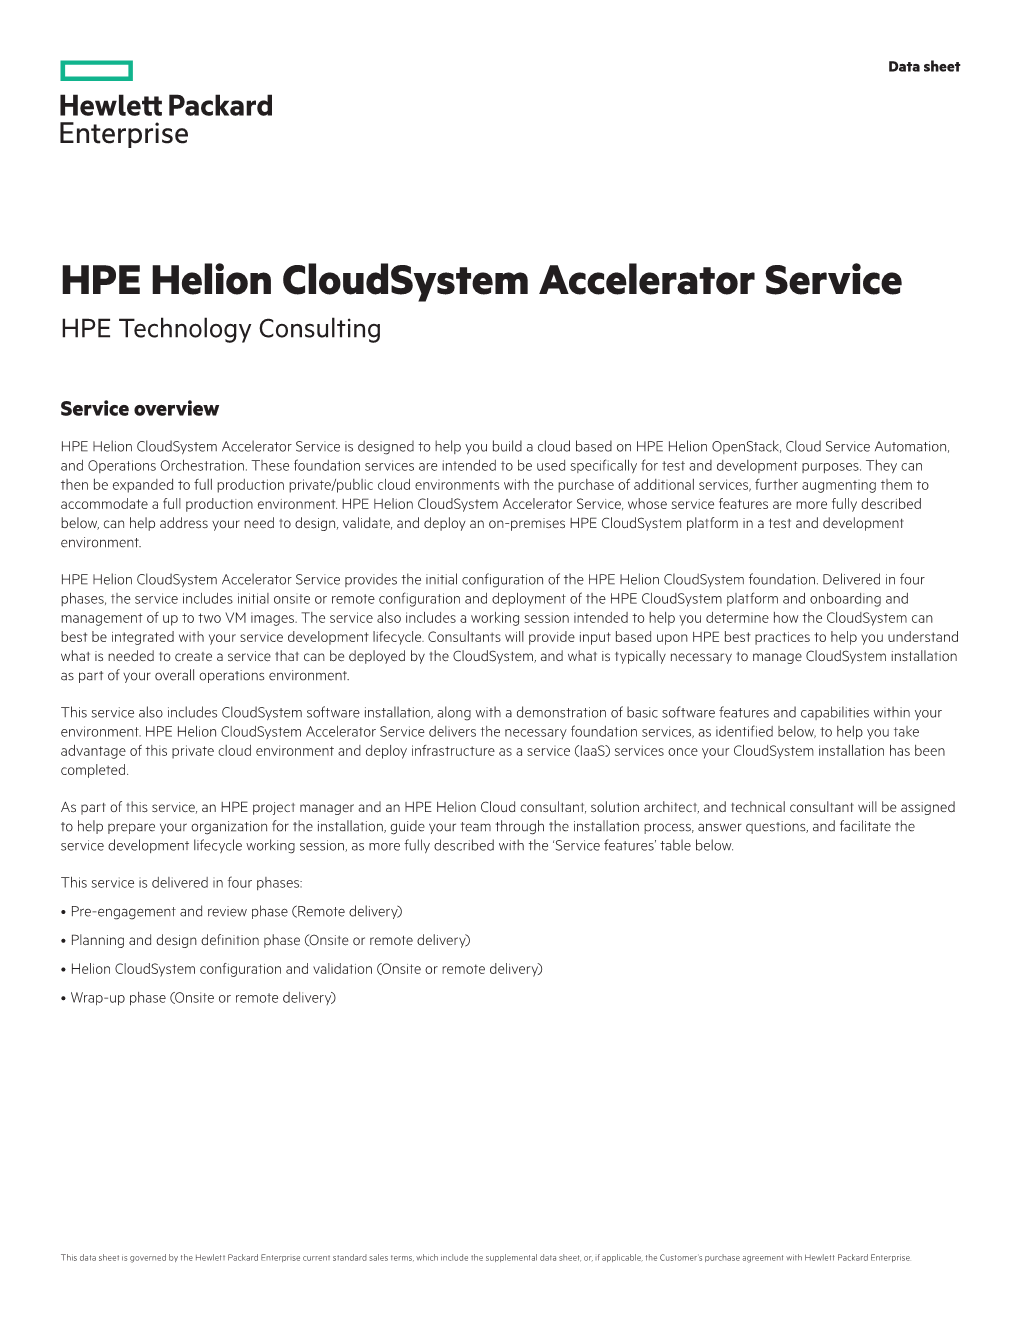 HPE Helion Cloudsystem Accelerator Service HPE Technology Consulting